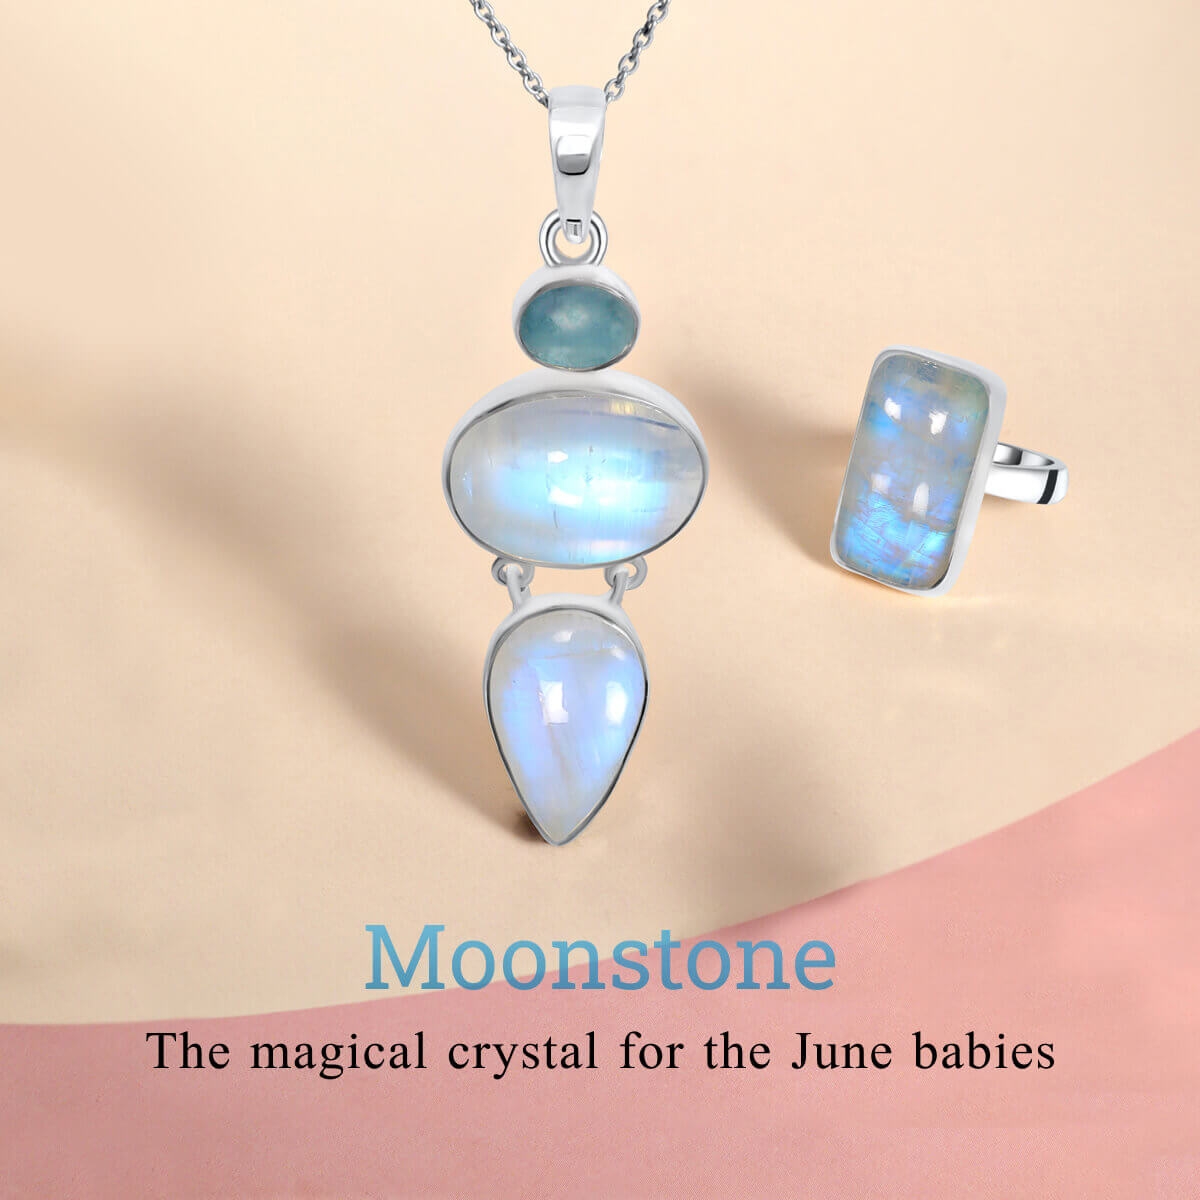 Moonstone - The magical crystal for the June babies